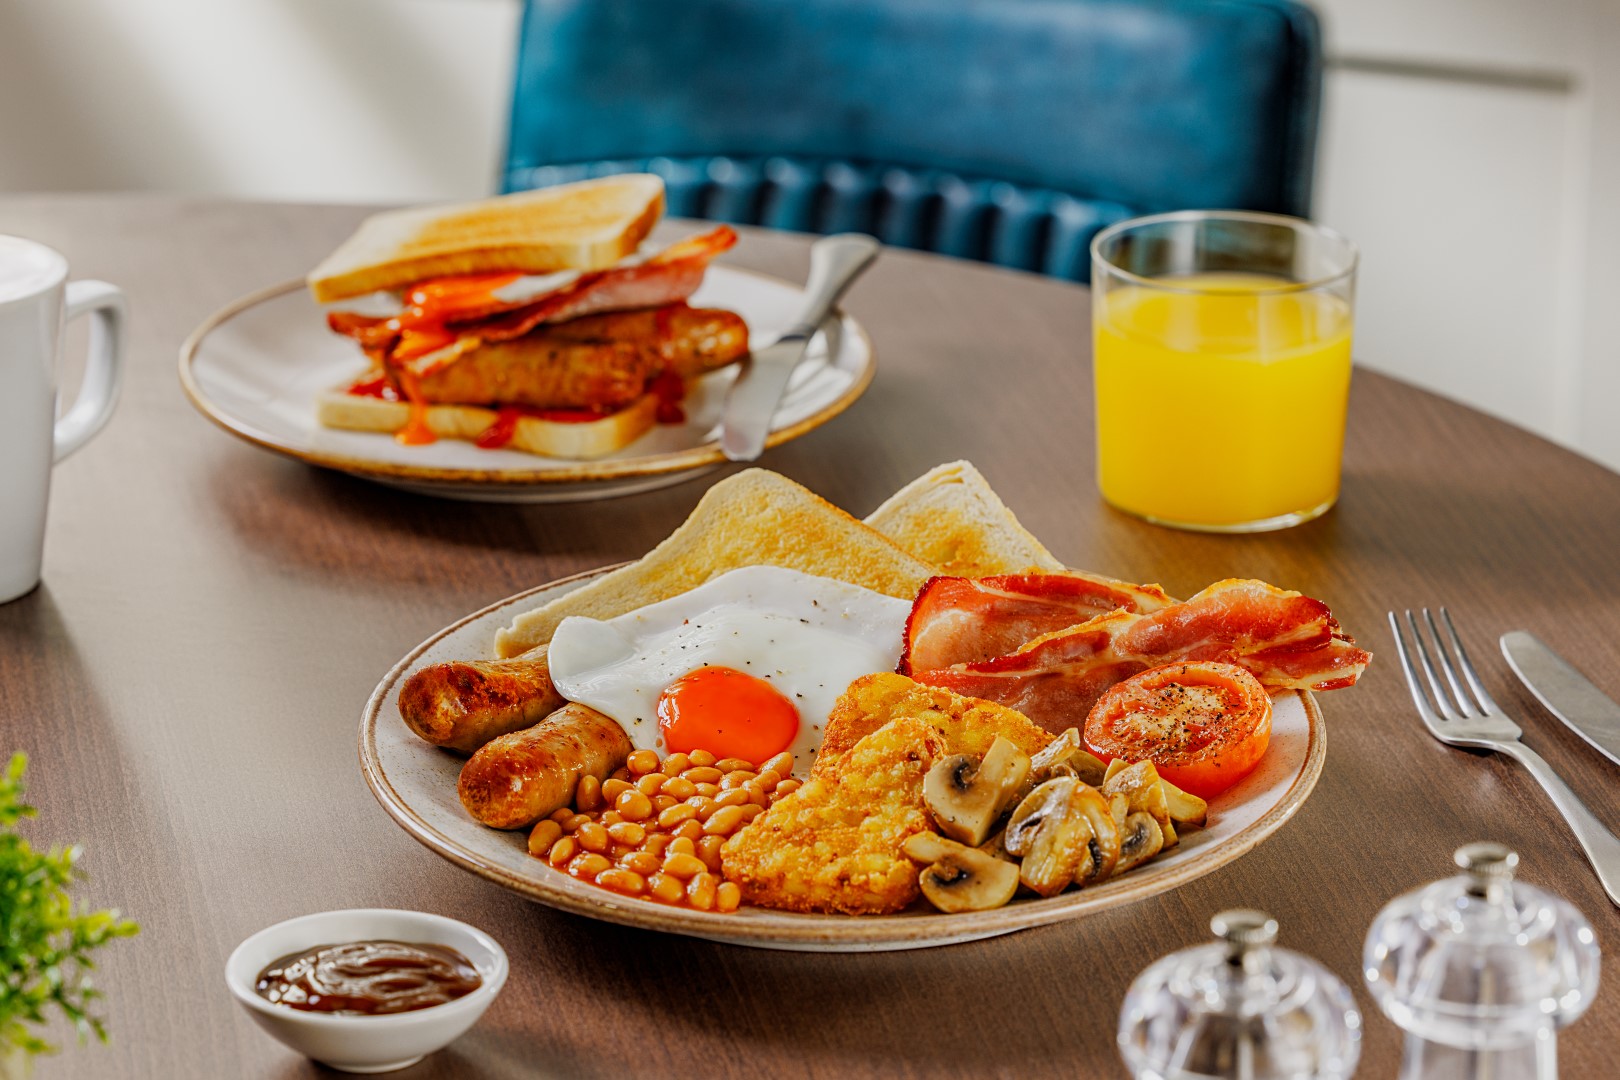 UNLIMITED BREAKFAST meal FOR £9.99 at Whitbread inns 